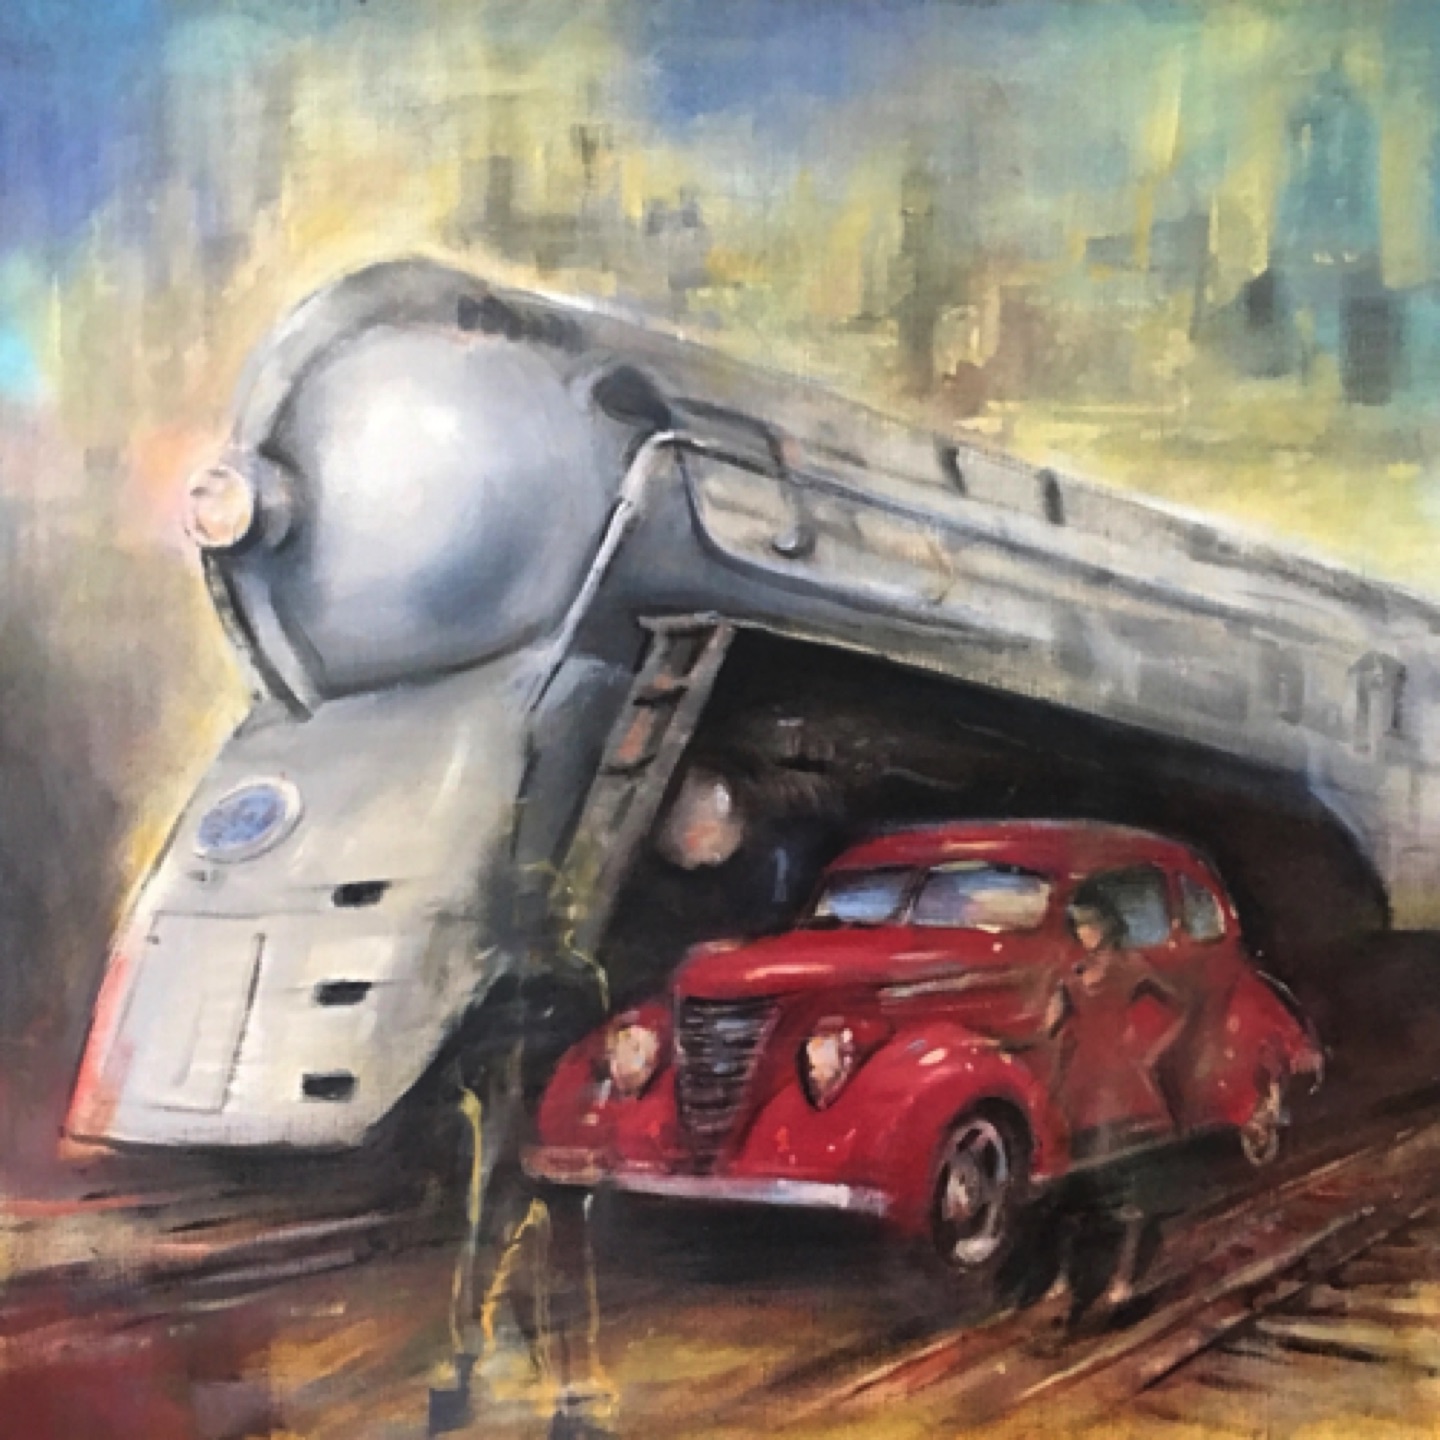 Gregg Chadwick
A Timeless World- Chicago
30"x30"oil on linen 2019
Private Collection, Green Bay, Wisconsin